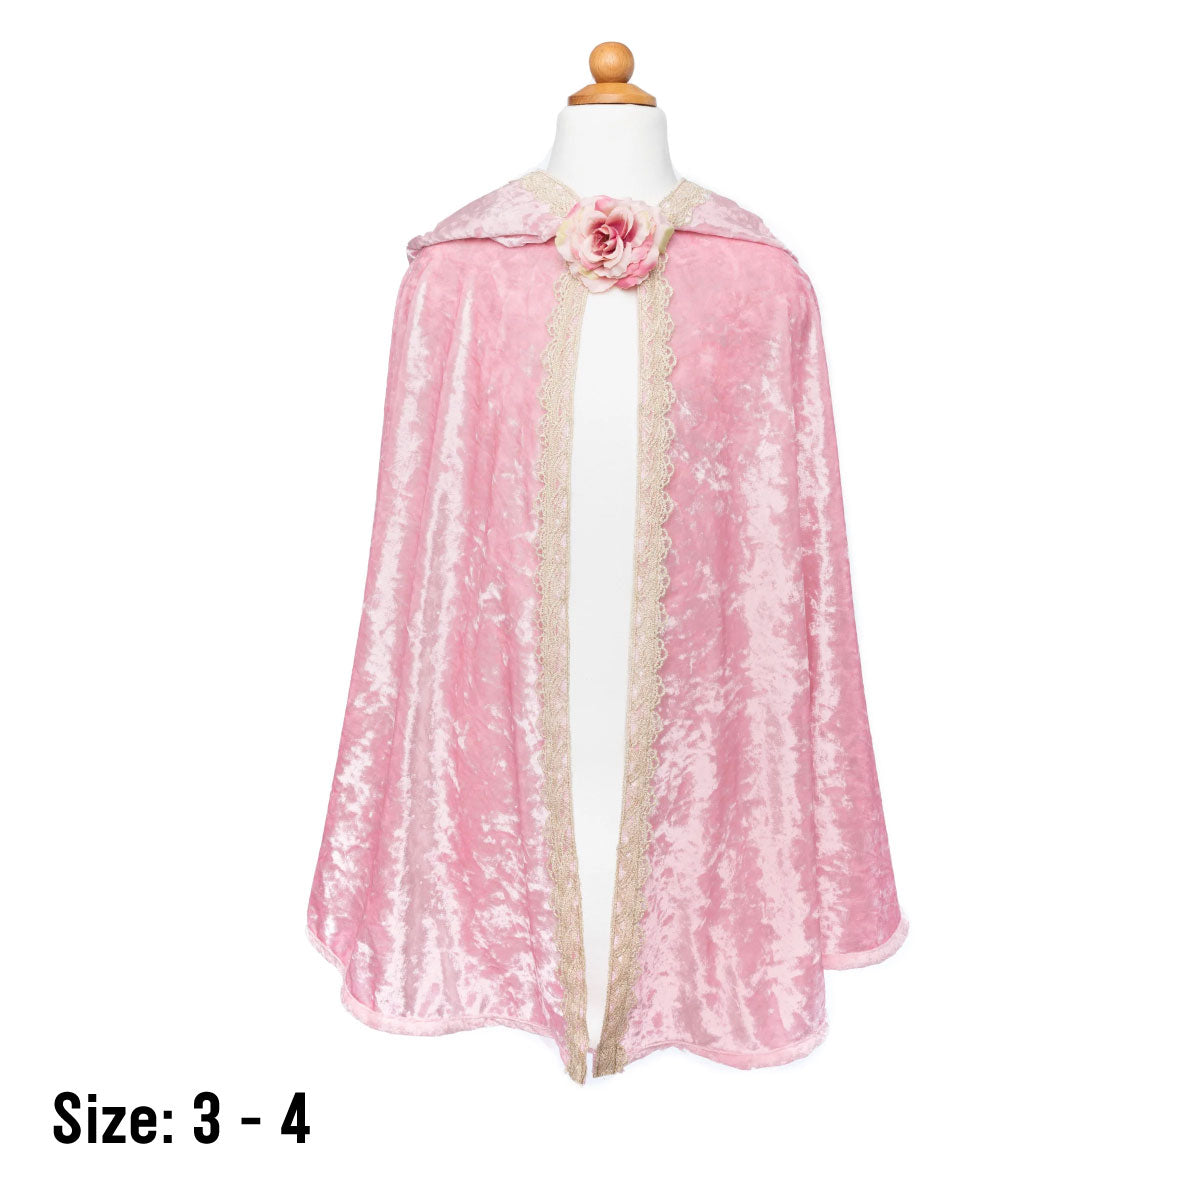 Deluxe Pink Princess Cape Size 3-4